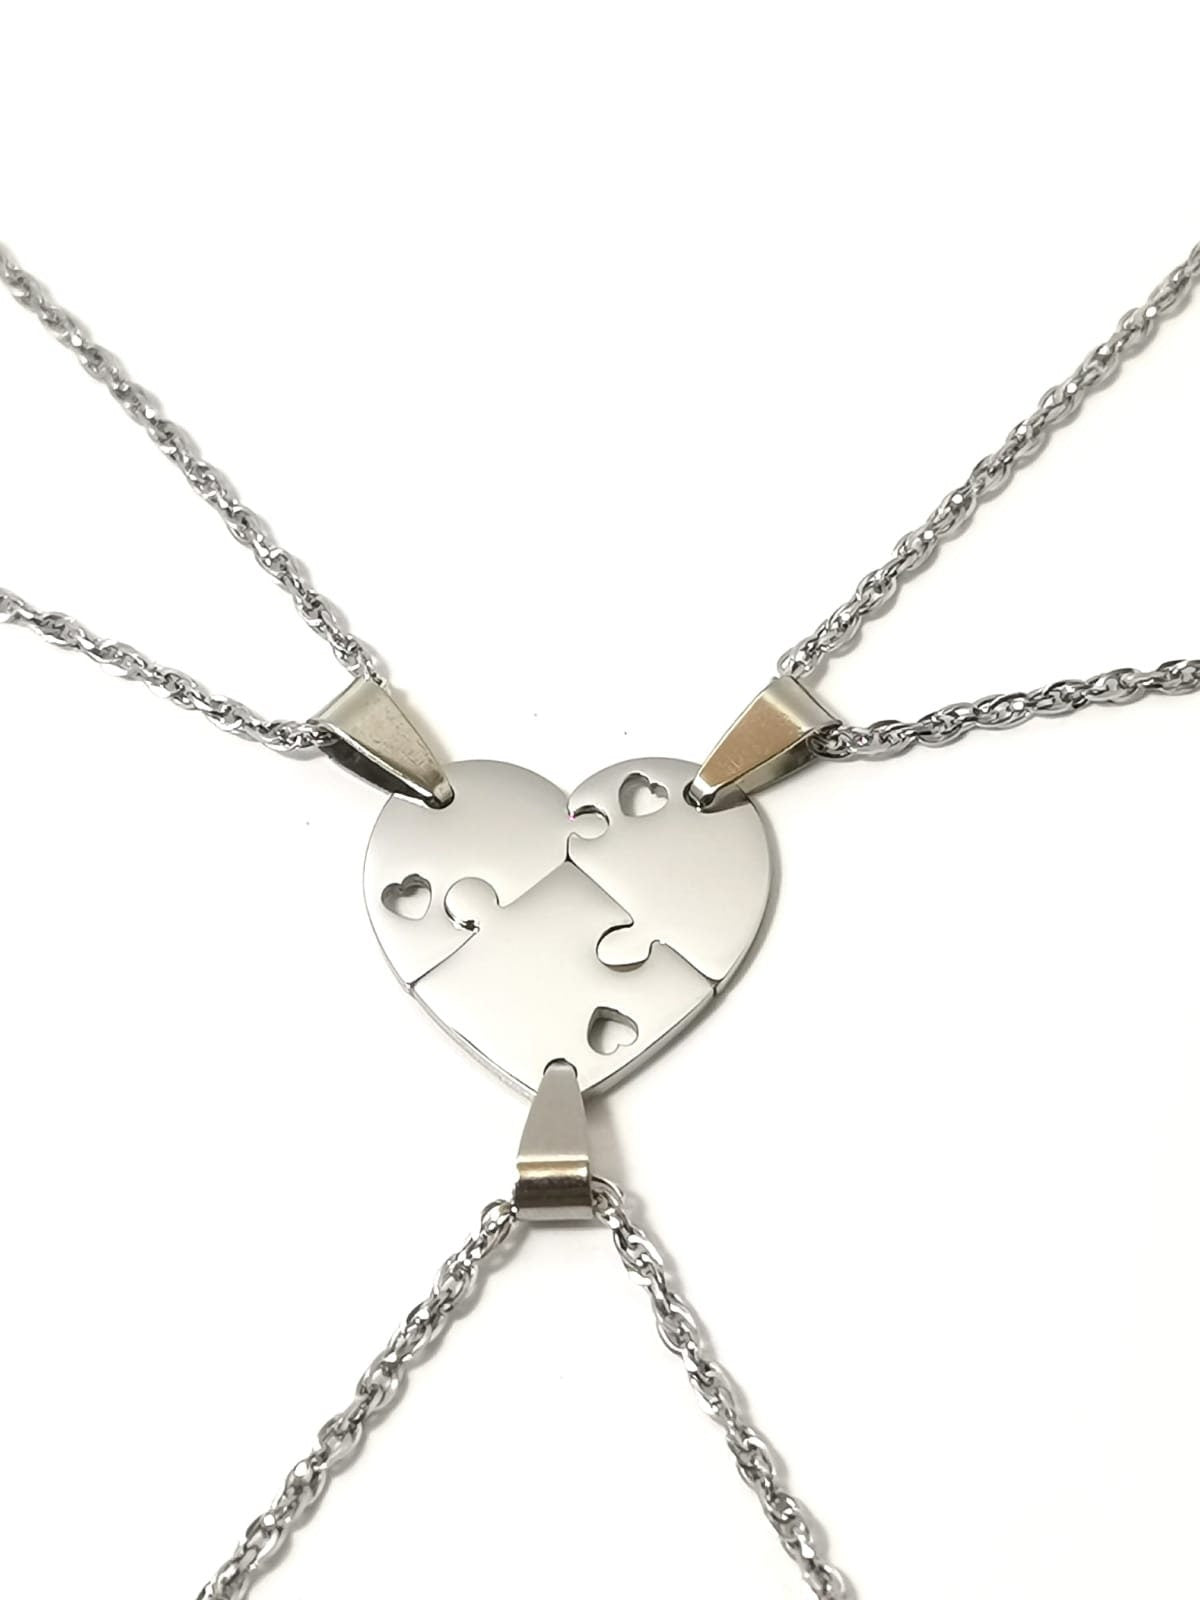 Personalised Stainless Steel 3 in 1 Heart Jigsaw Puzzle Interlocking Necklace